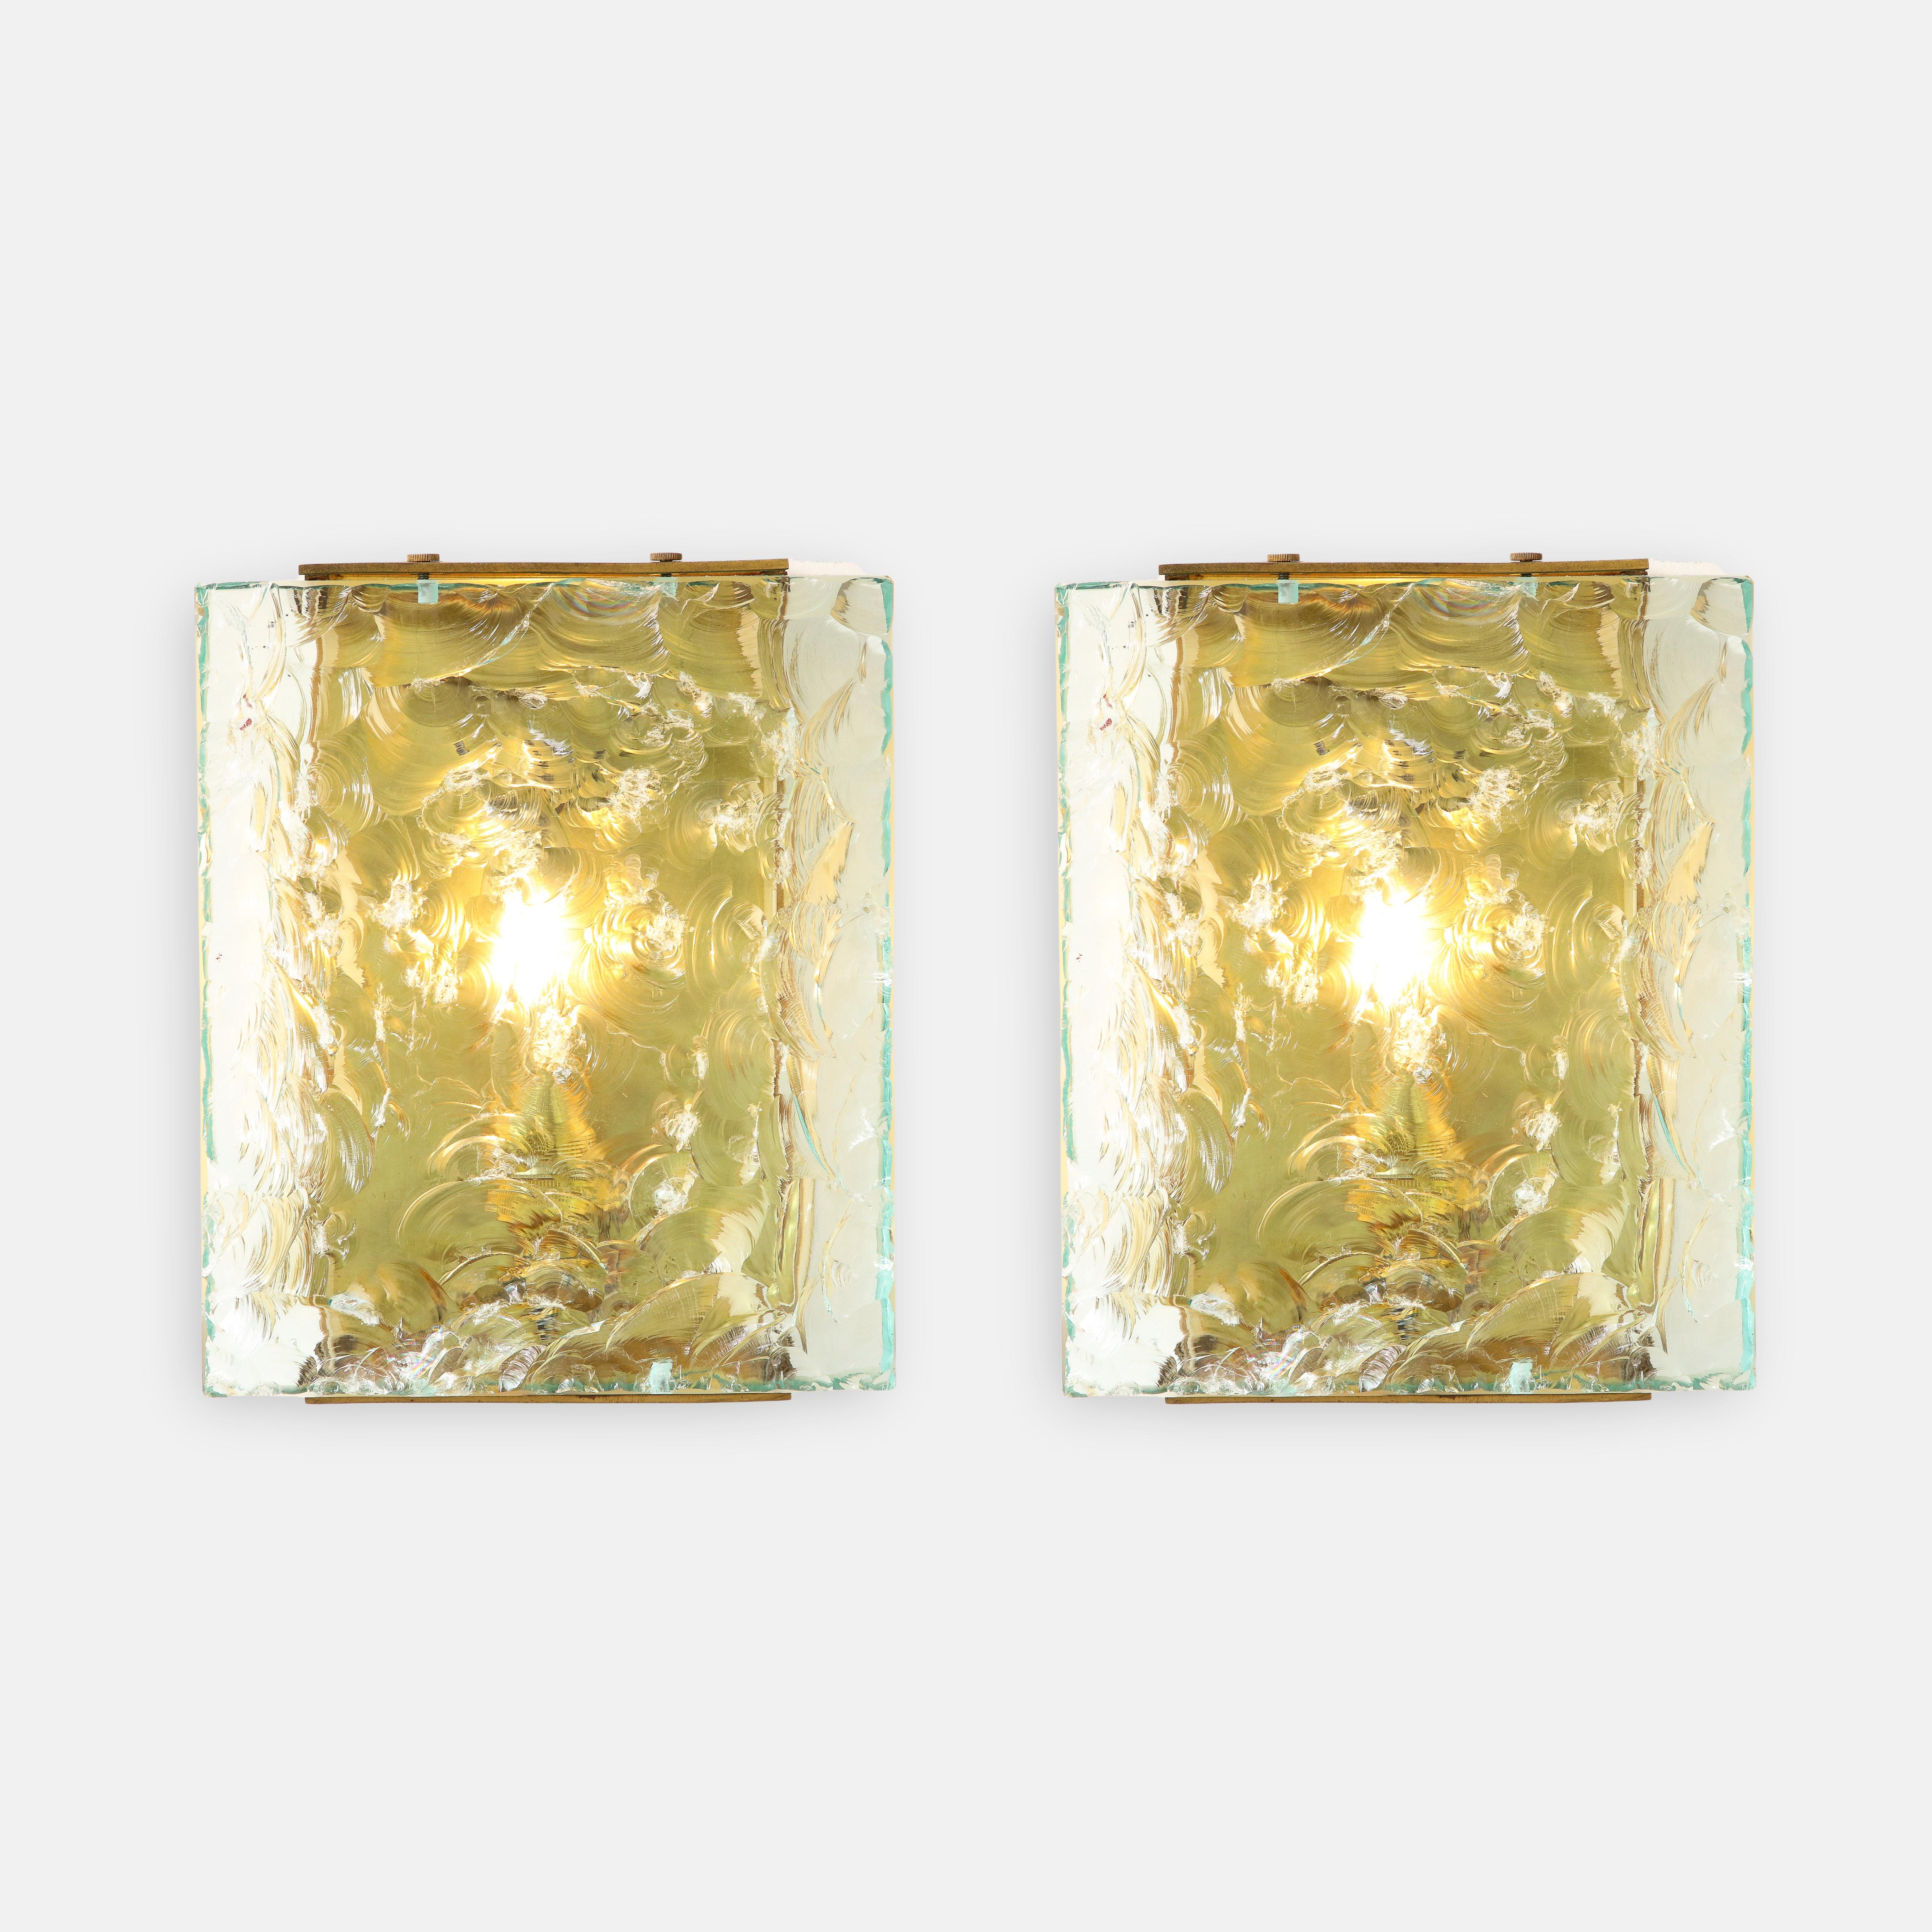 Max Ingrand for Fontana Arte exquisite pair of sconces model 2311 in thick chiseled glass with brass fittings and yellow colored glass side panels, Italy, circa 1964. These extraordinary sconces exhibit the delicate and harmonious combination of the